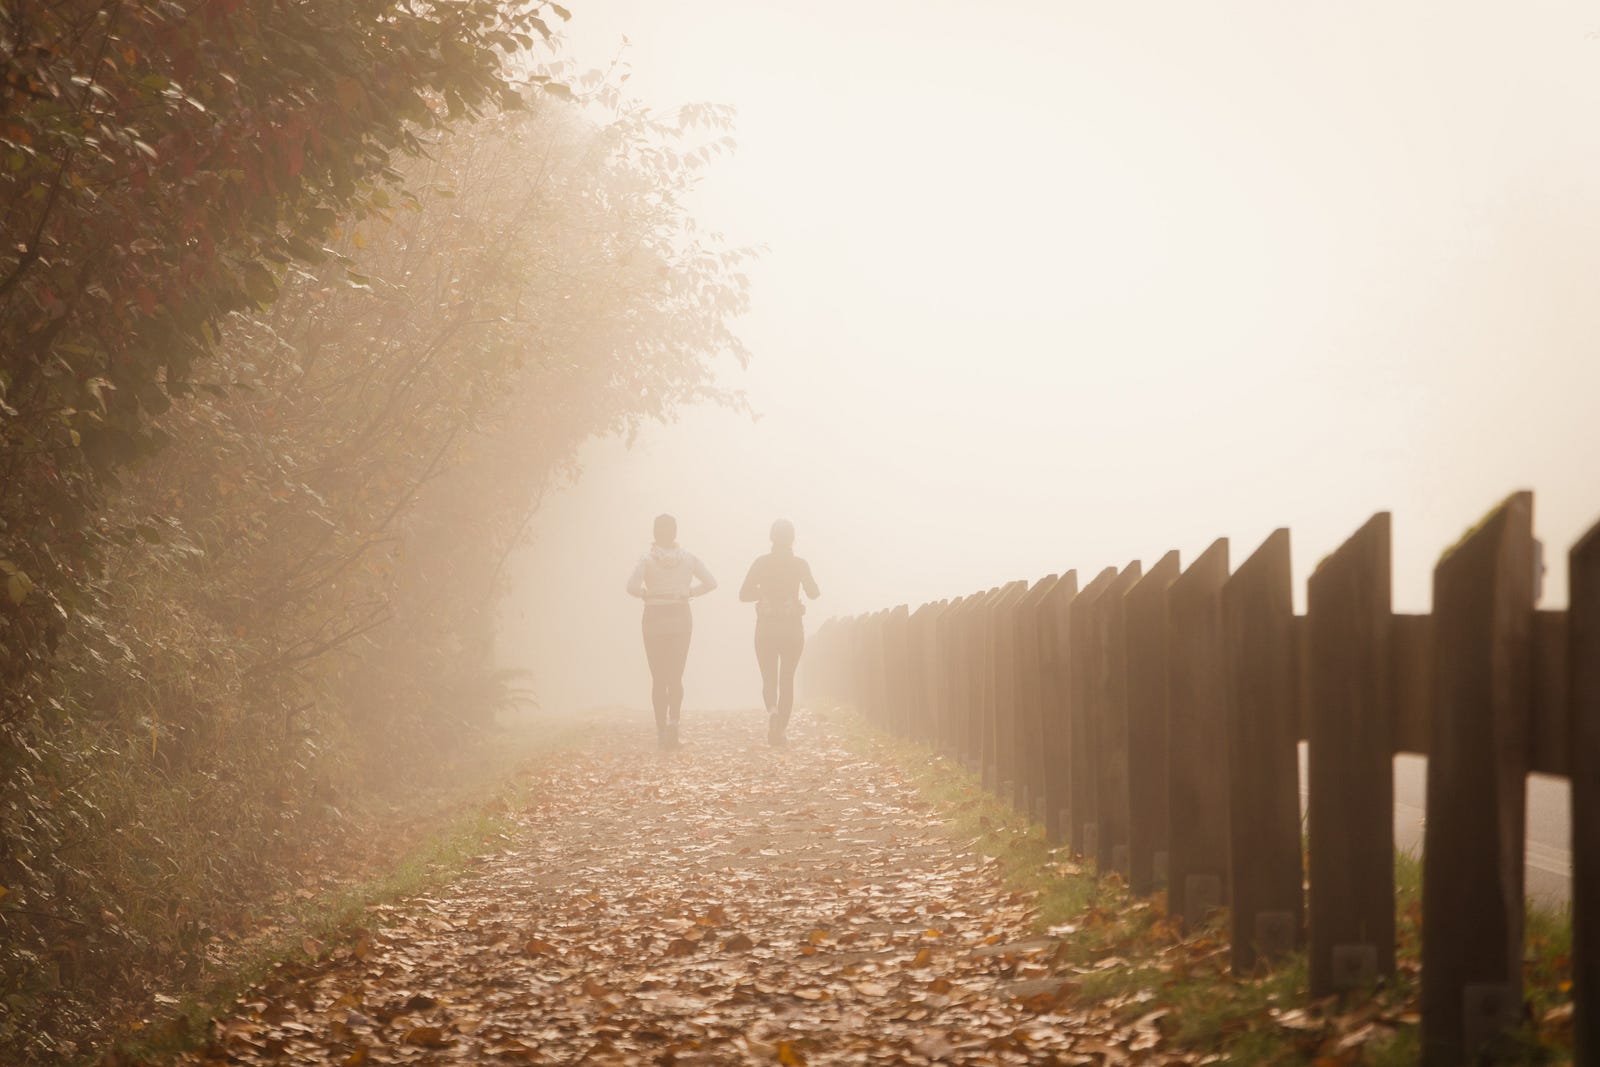 Two people run away from us in the distance in a sepia image. There is a wooden fence to their right and shrubs to their left. The day appears foggy. Studies have also shown intermittent fasting can lead to weight loss and improve metabolic health markers, such as insulin sensitivity and cholesterol levels.